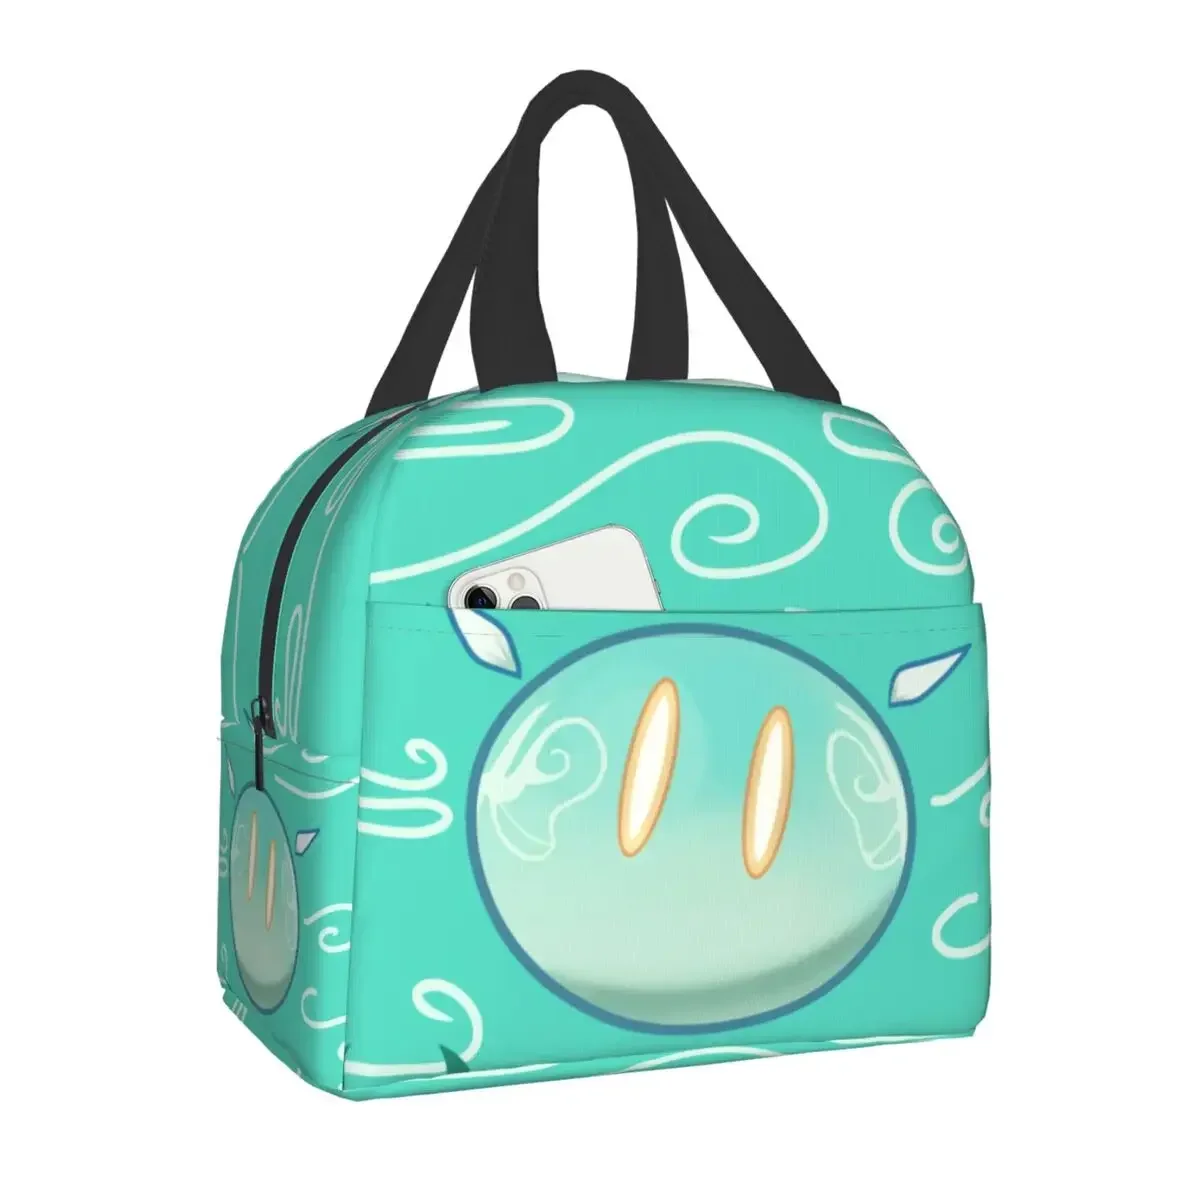 

Slime Genshin Impact Insulated Lunch Tote Bag for Women Anime Game Portable Cooler Thermal Bento Box Camping Travel Picnic